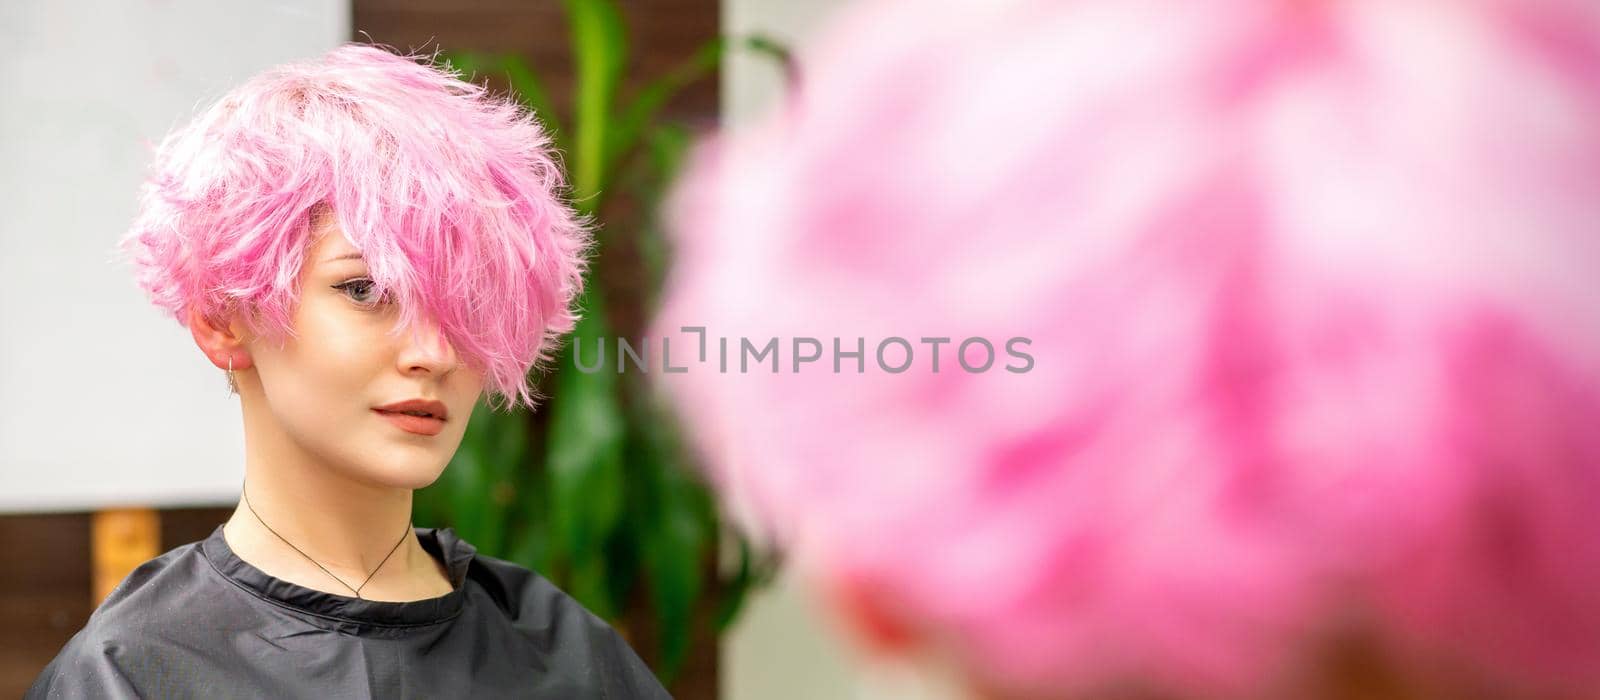 The beautiful young caucasian woman with a new pink short hairstyle in the mirror reflection looking at the camera in a hairdresser salon. by okskukuruza